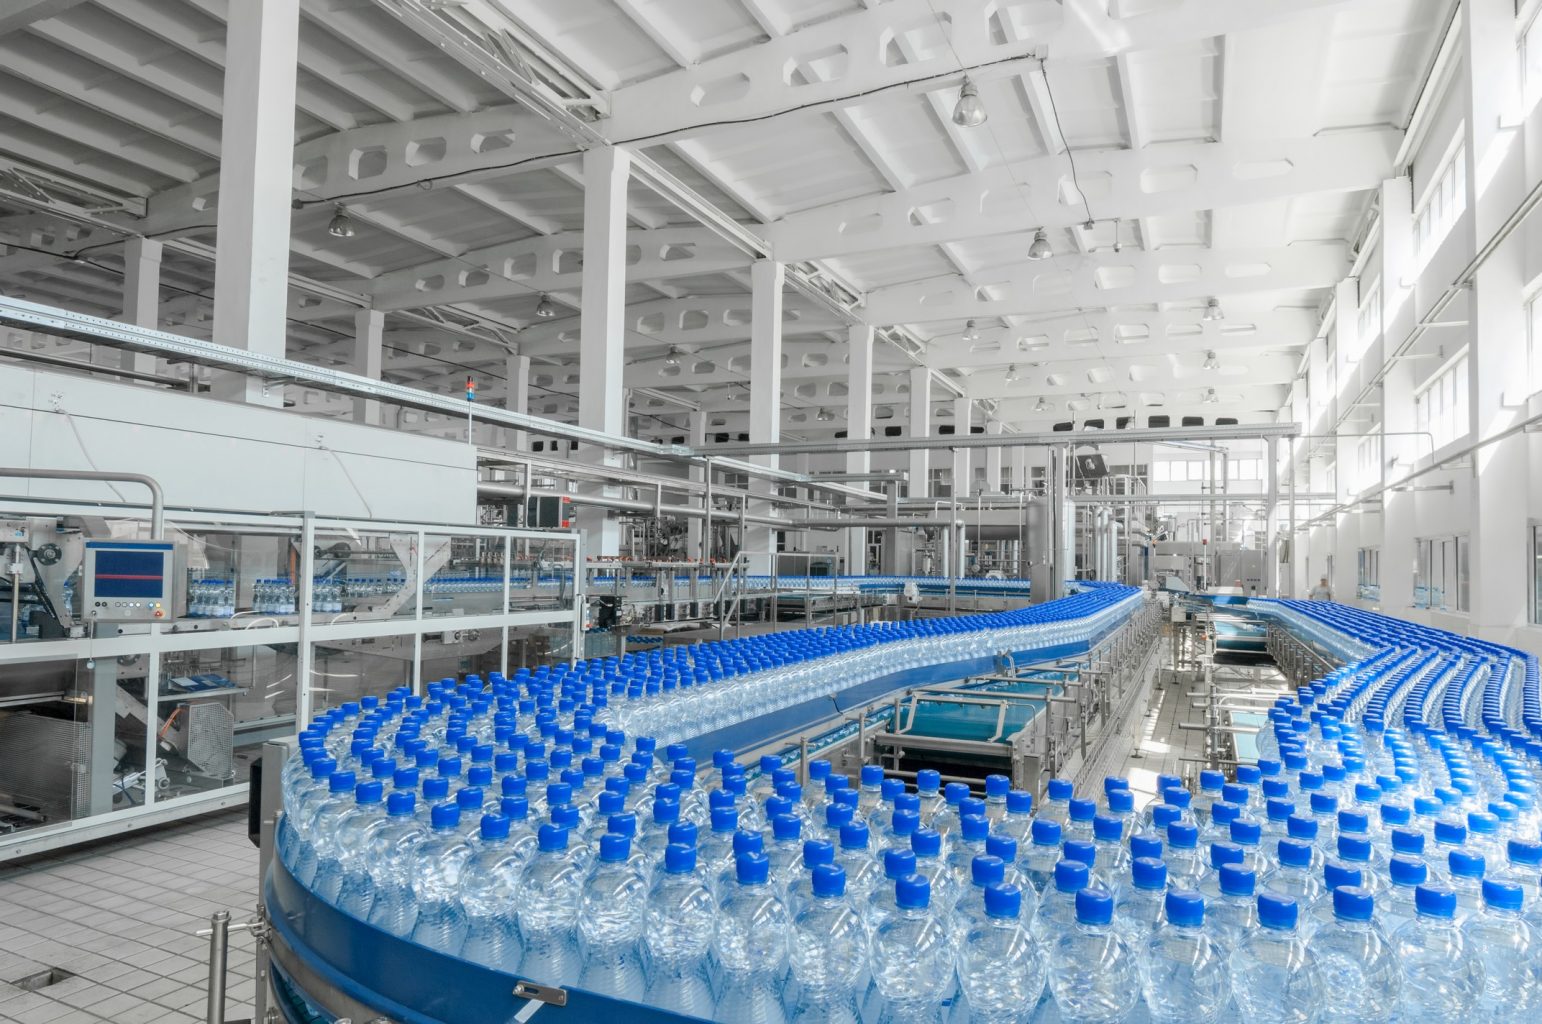 bottled water options in greenville, spartanburg and anderson, south carolina